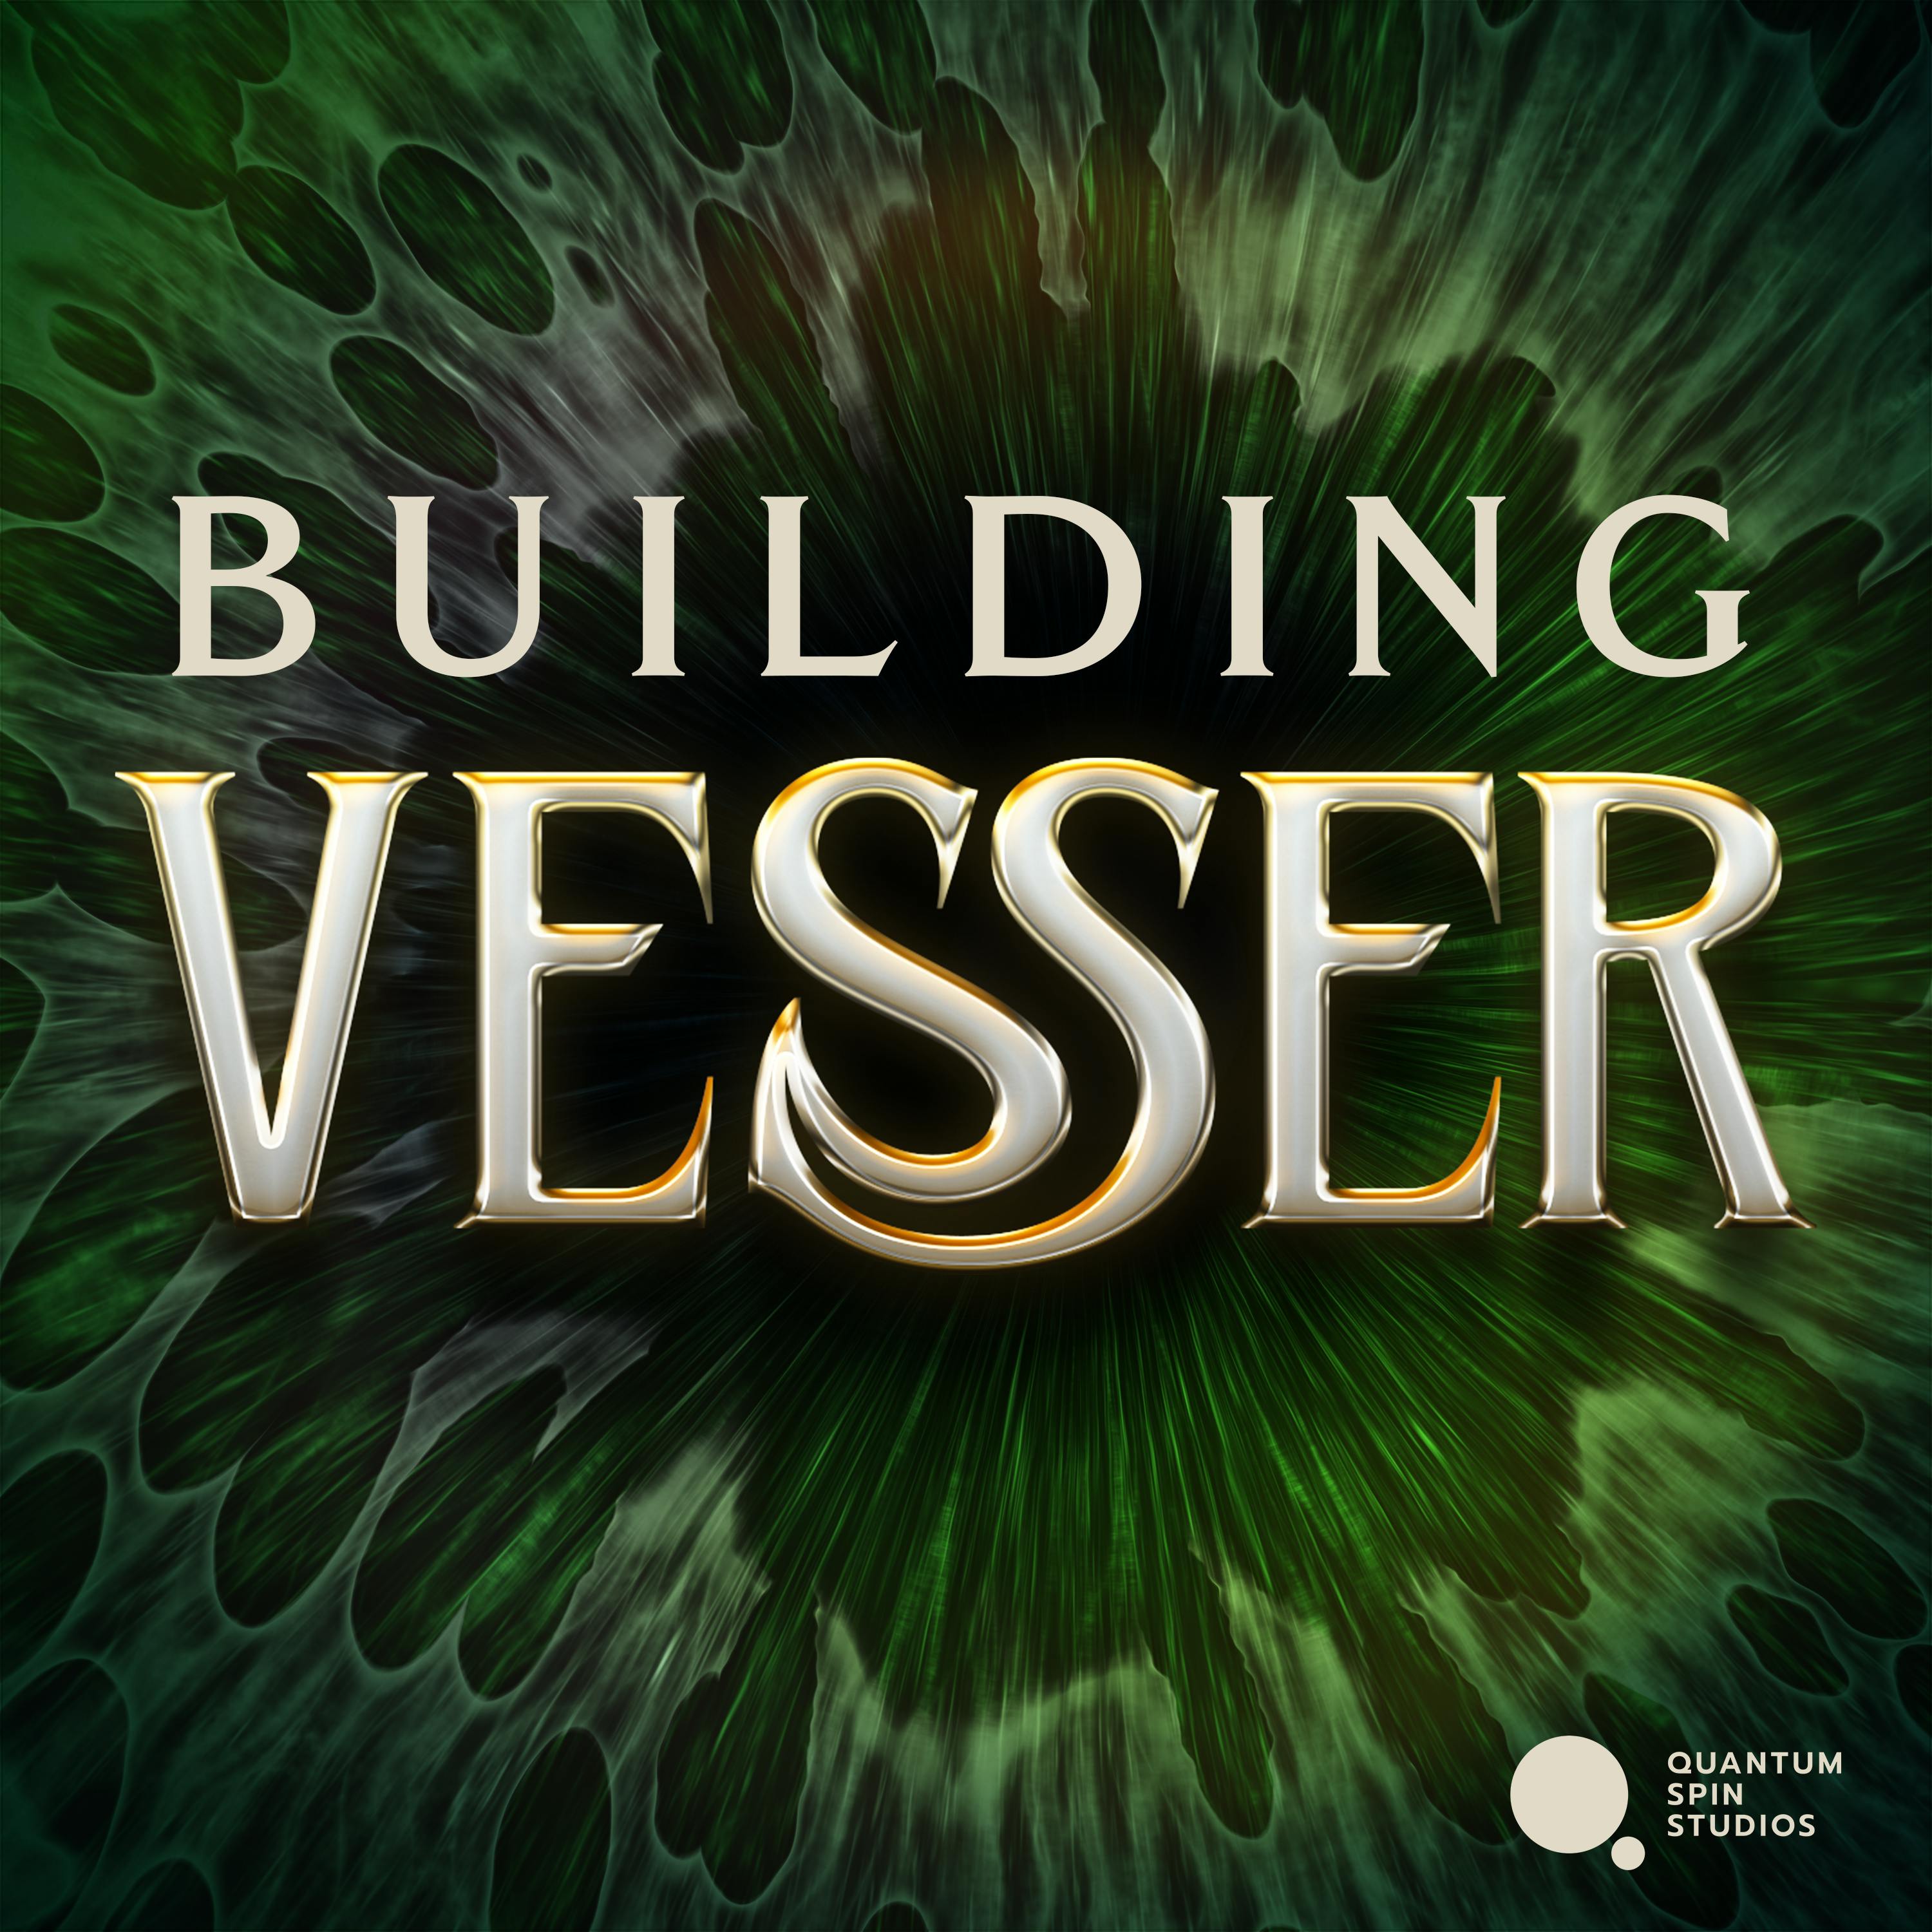 Building Vesser: Clothing, Body Language, and Social Movements